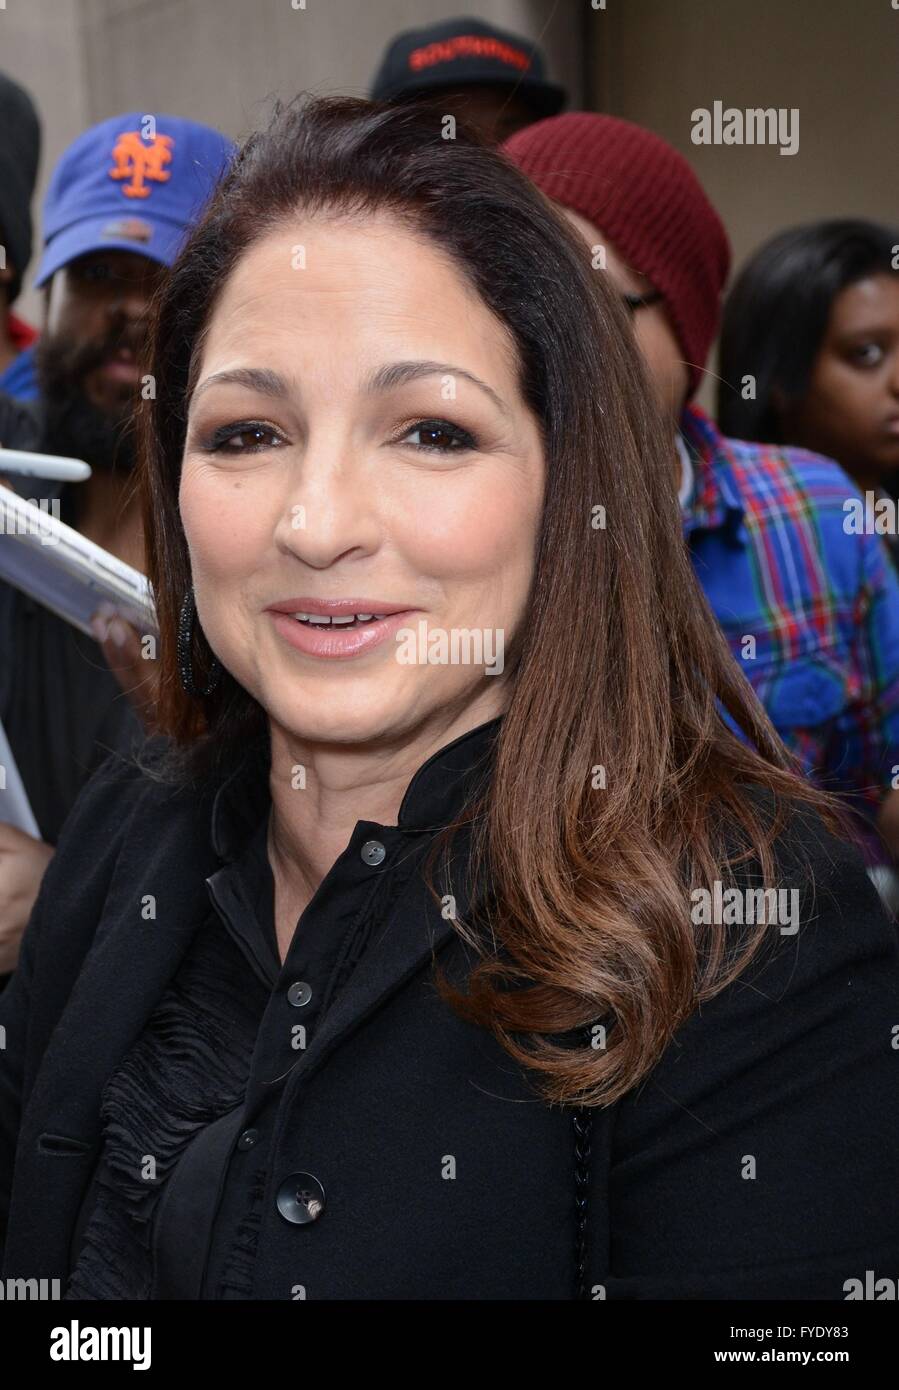 New York, NY, USA. 26th Apr, 2016. Gloria Estefan out and about for Celebrity Candids - TUE, New York, NY April 26, 2016. Credit:  Derek Storm/Everett Collection/Alamy Live News Stock Photo